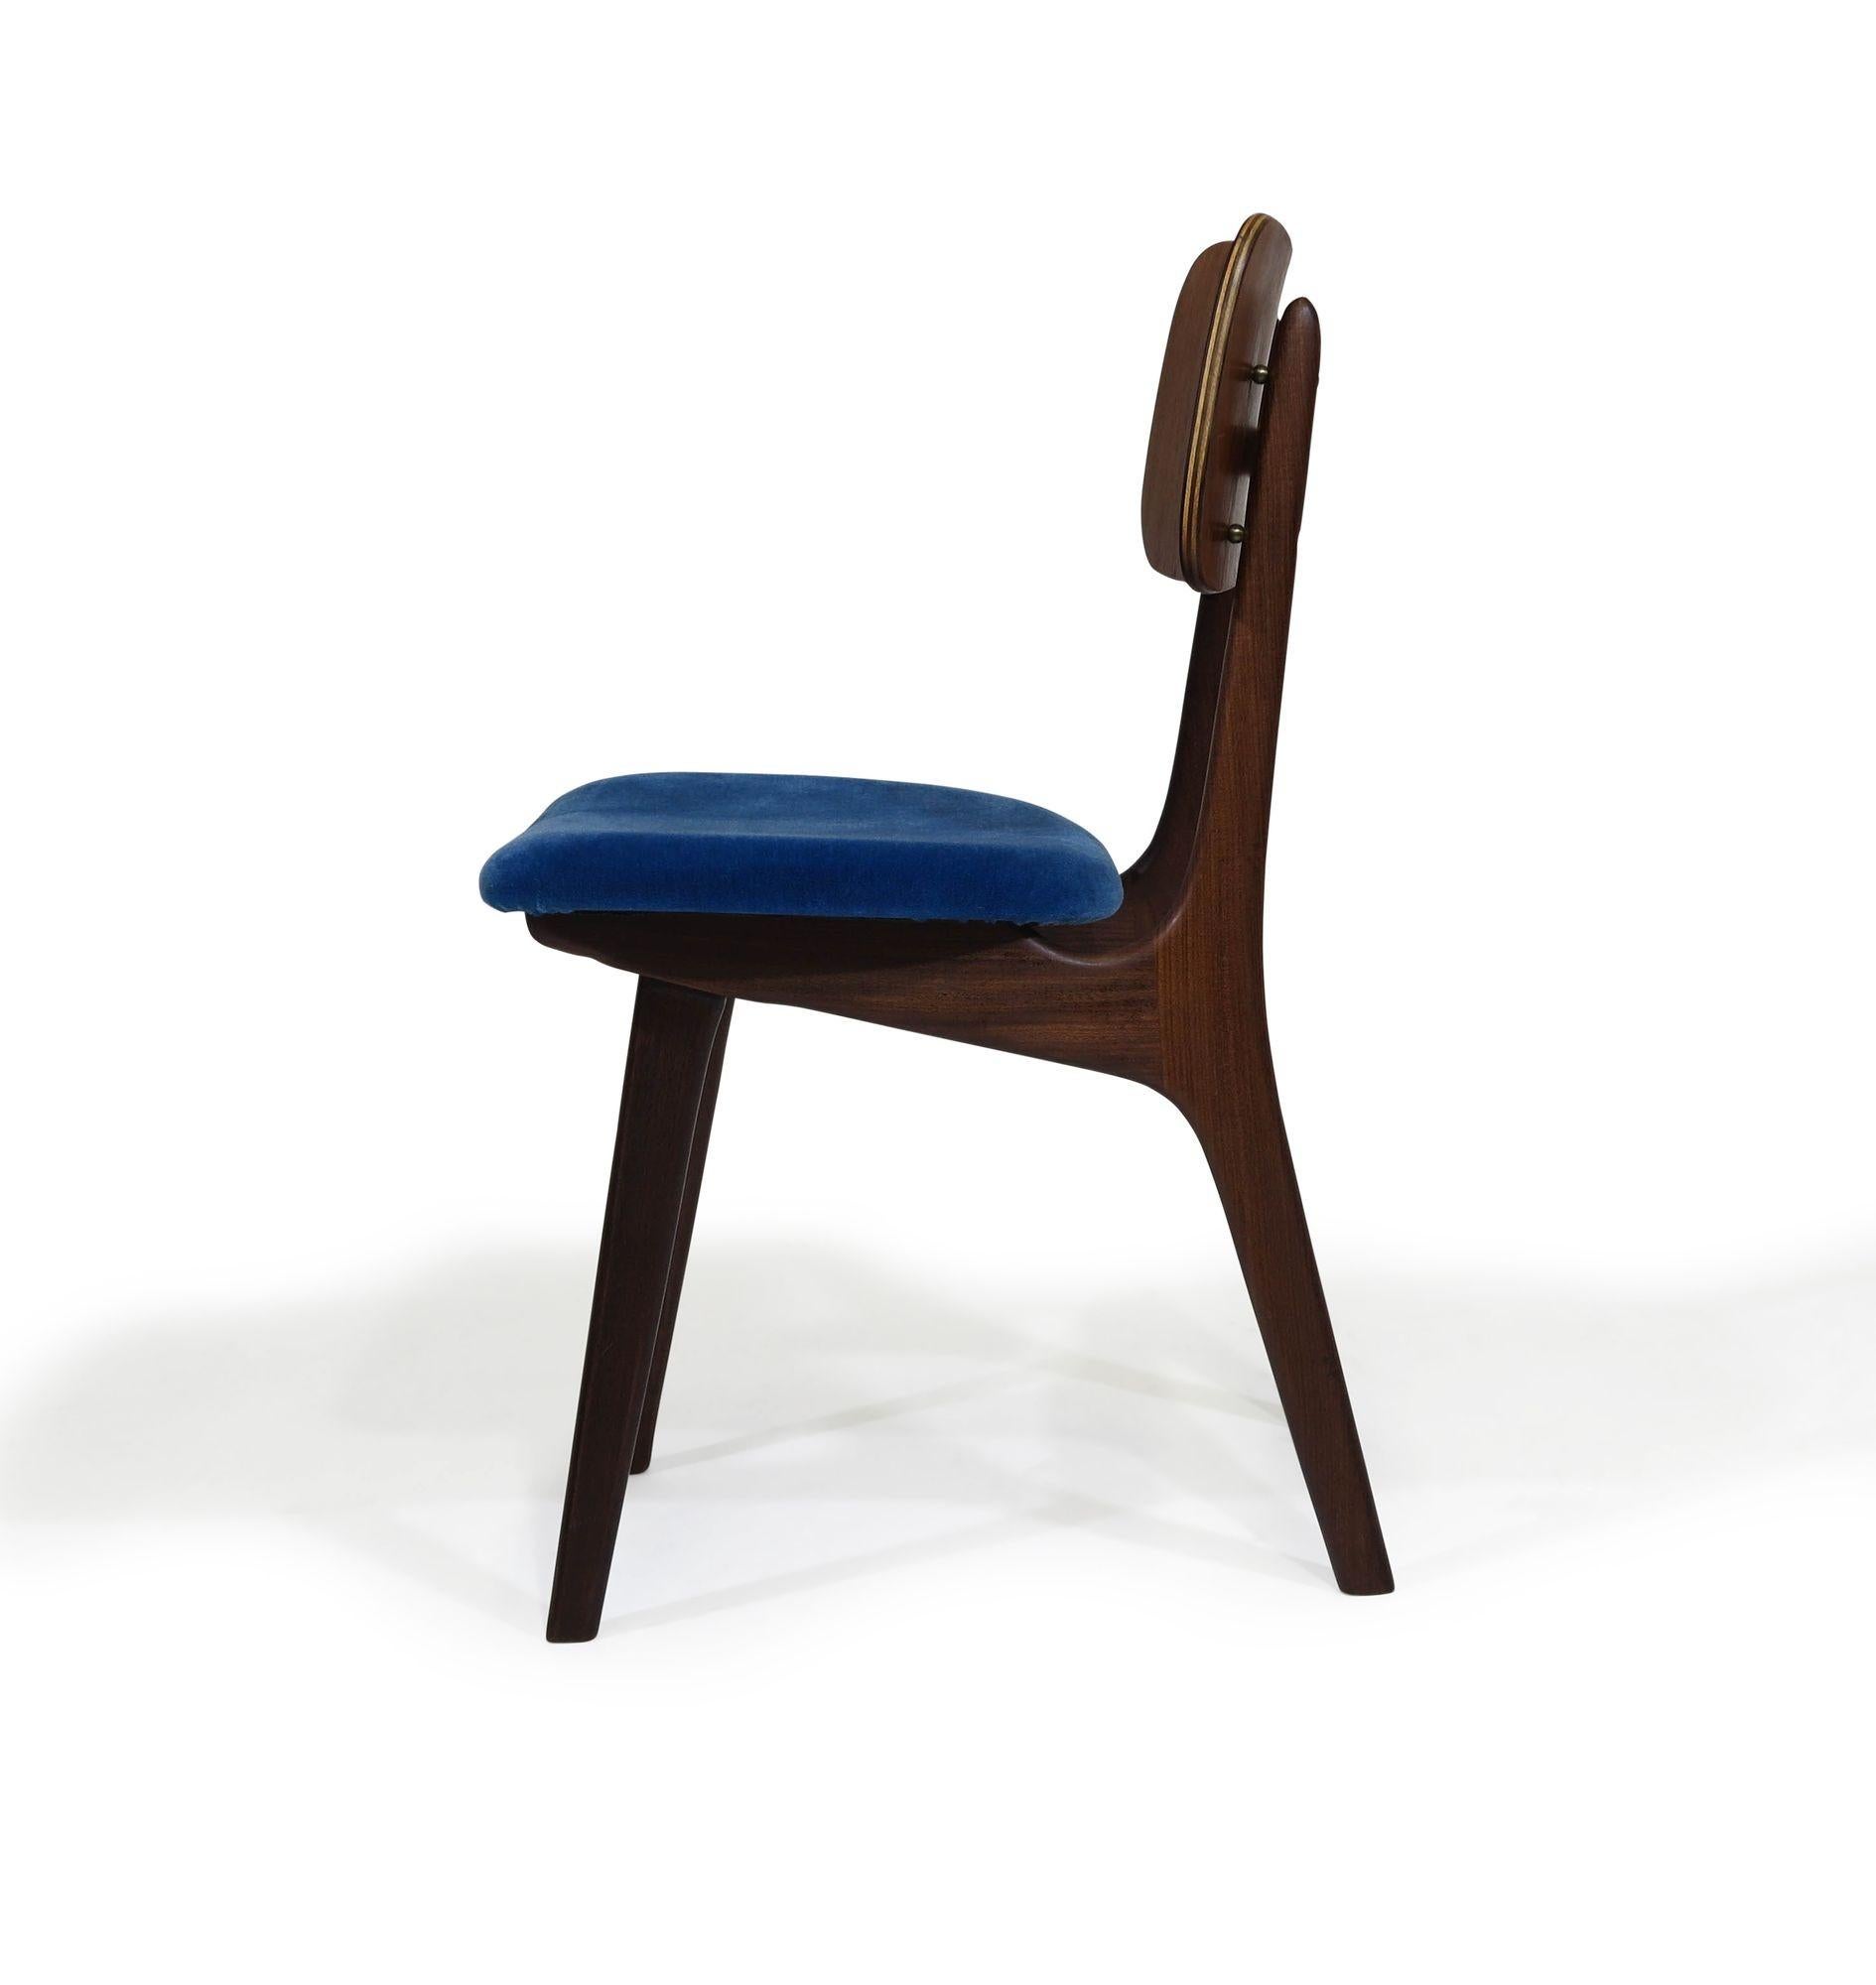 Danish Six Arne Hovmand-Olsen Walnut and Teak Dining Chairs, 30 Available For Sale